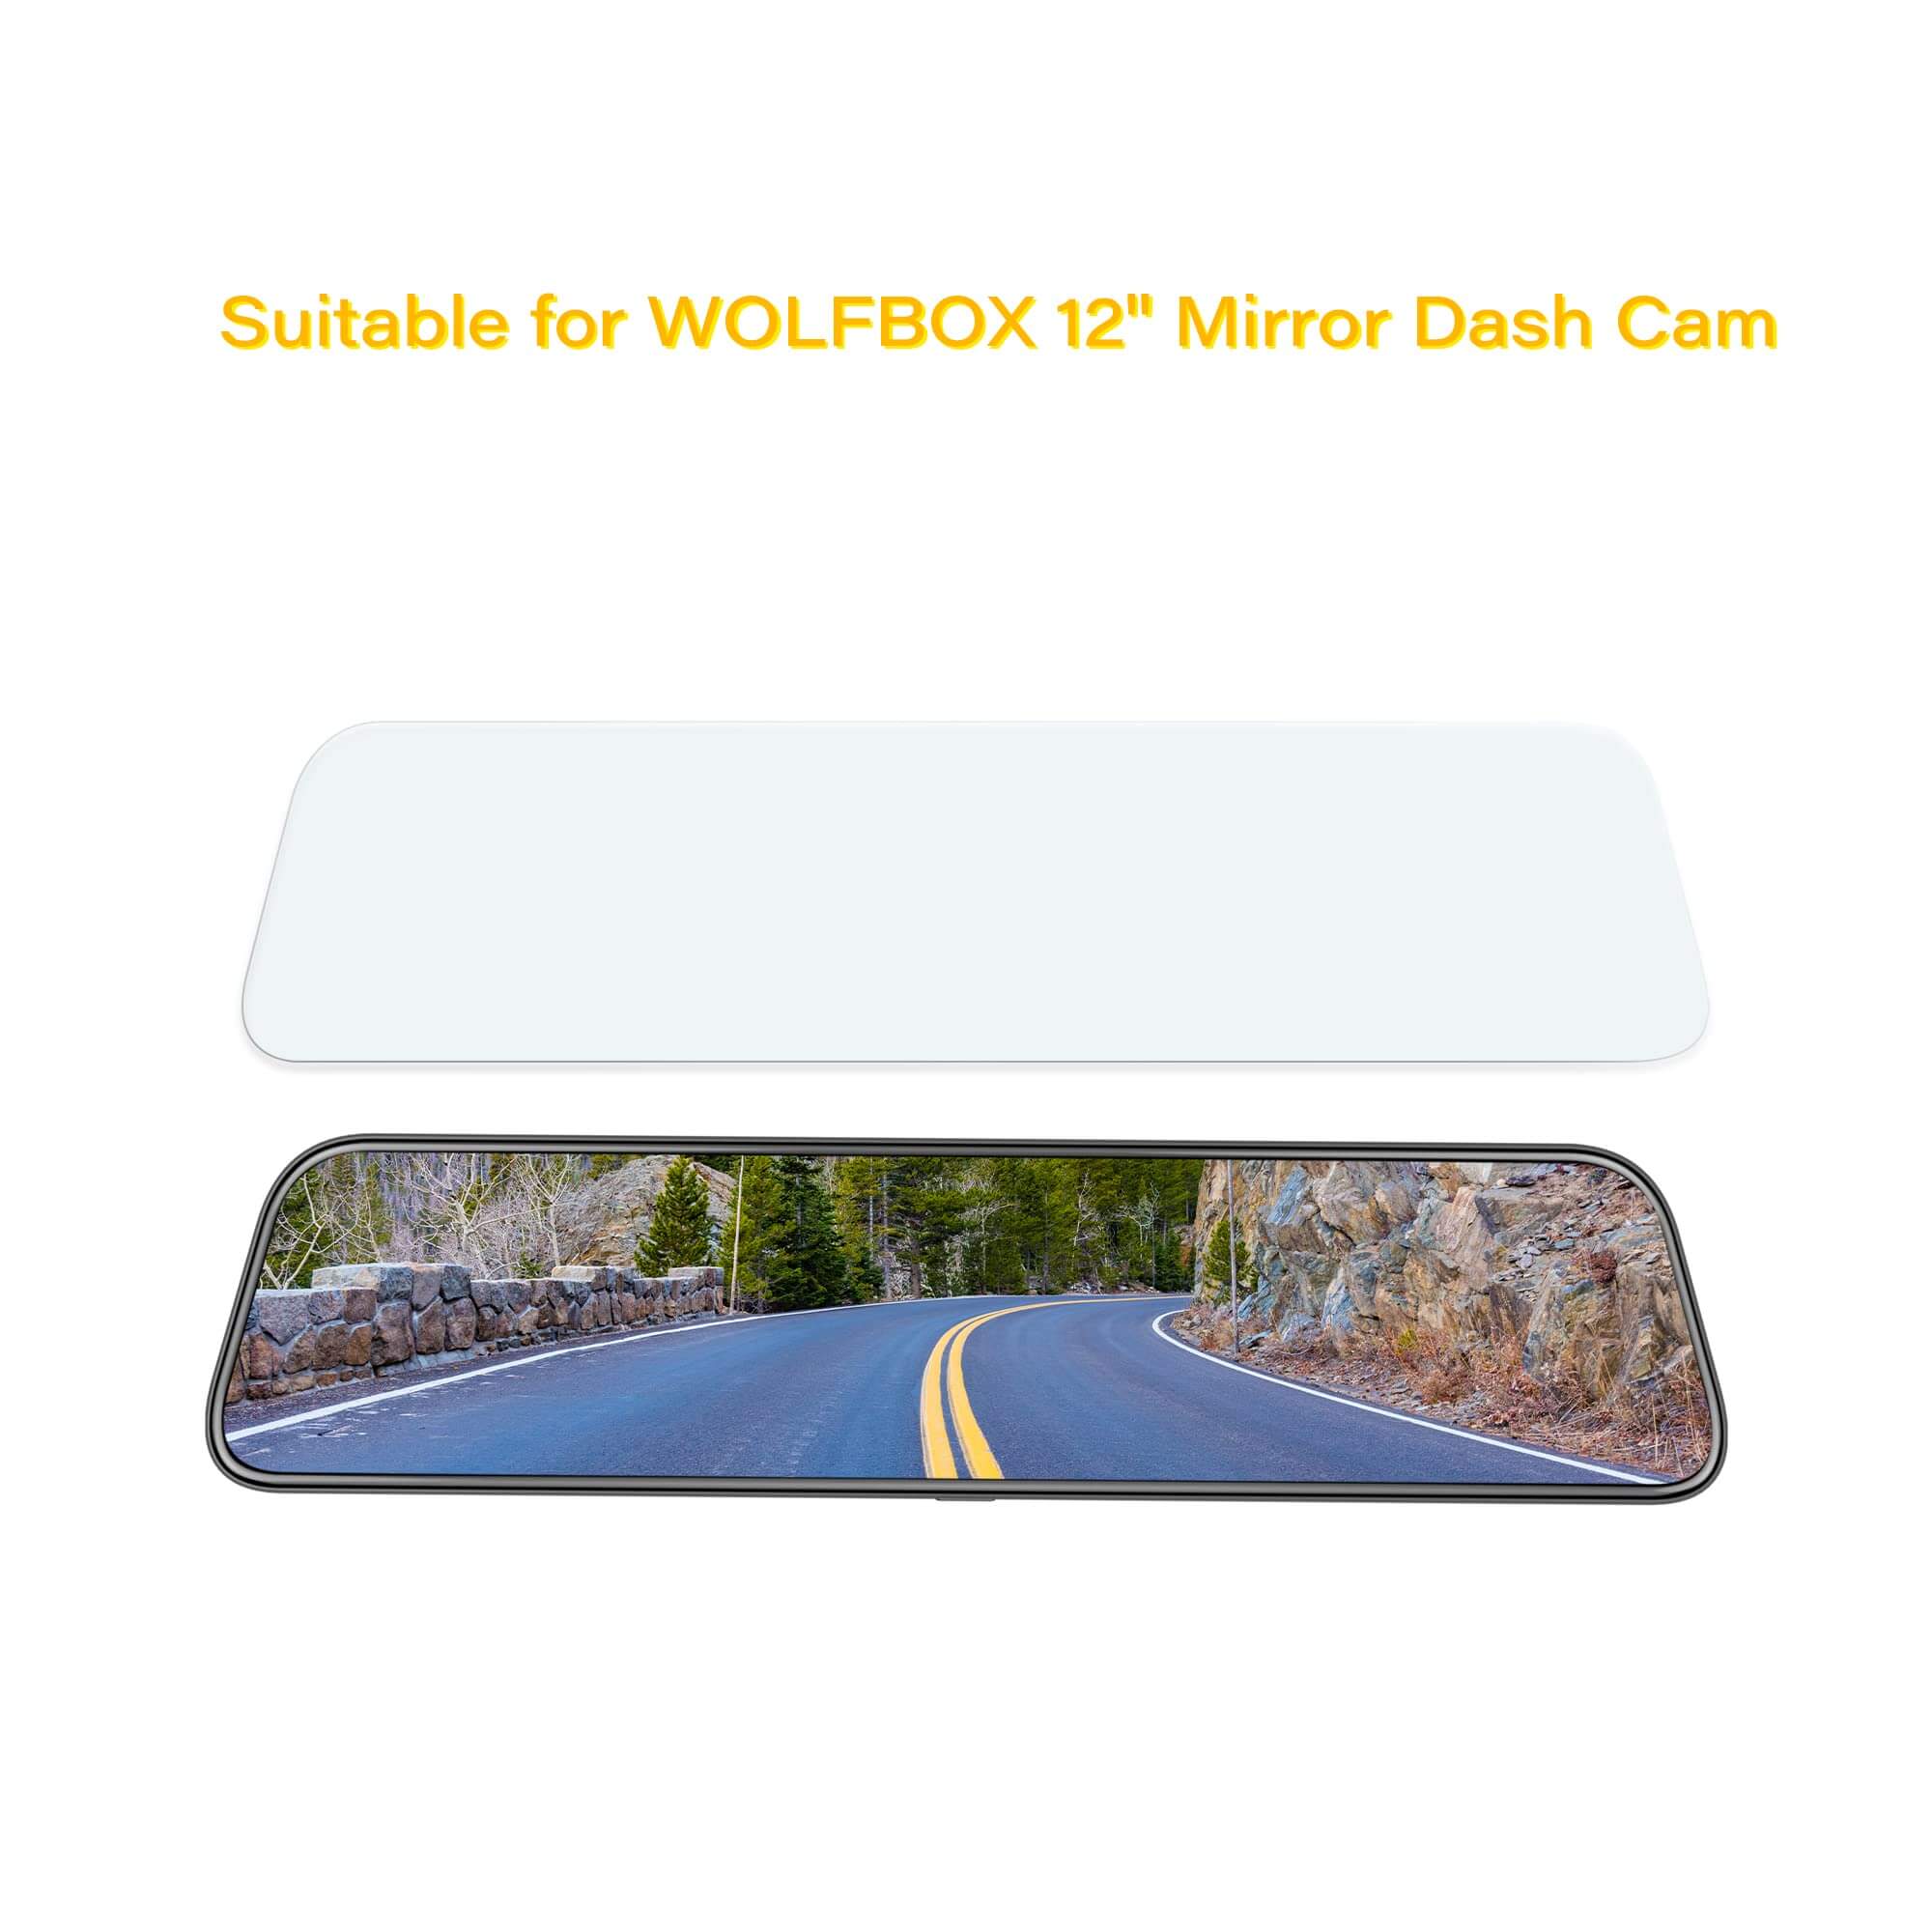 WOLFBOX 12inch Anti-Glare Film for Rear View Mirror Camera Accessory WOLFBOX   